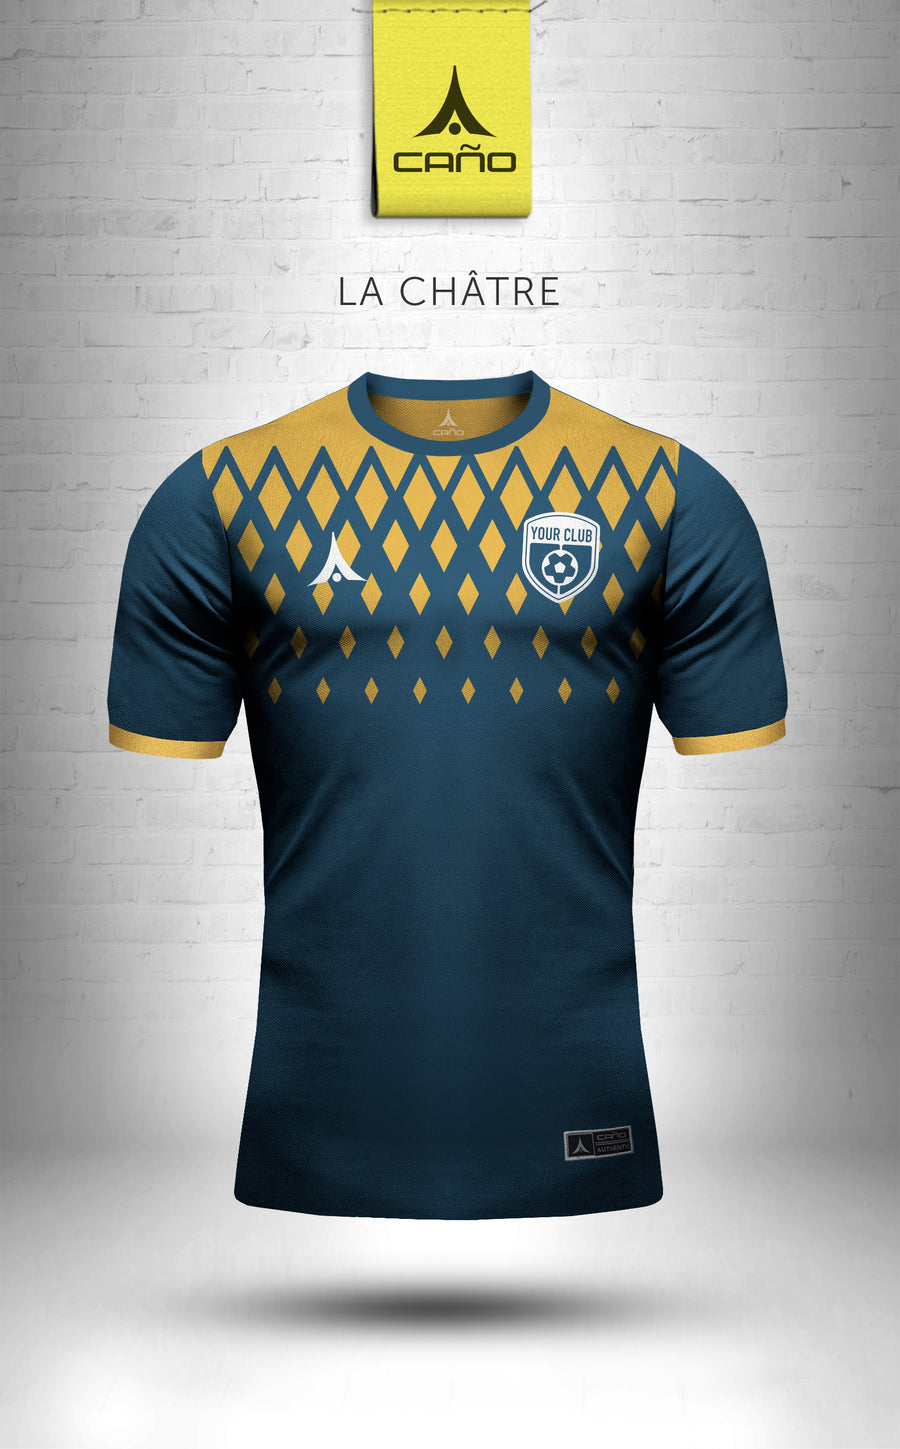 La Chatre in navy/gold